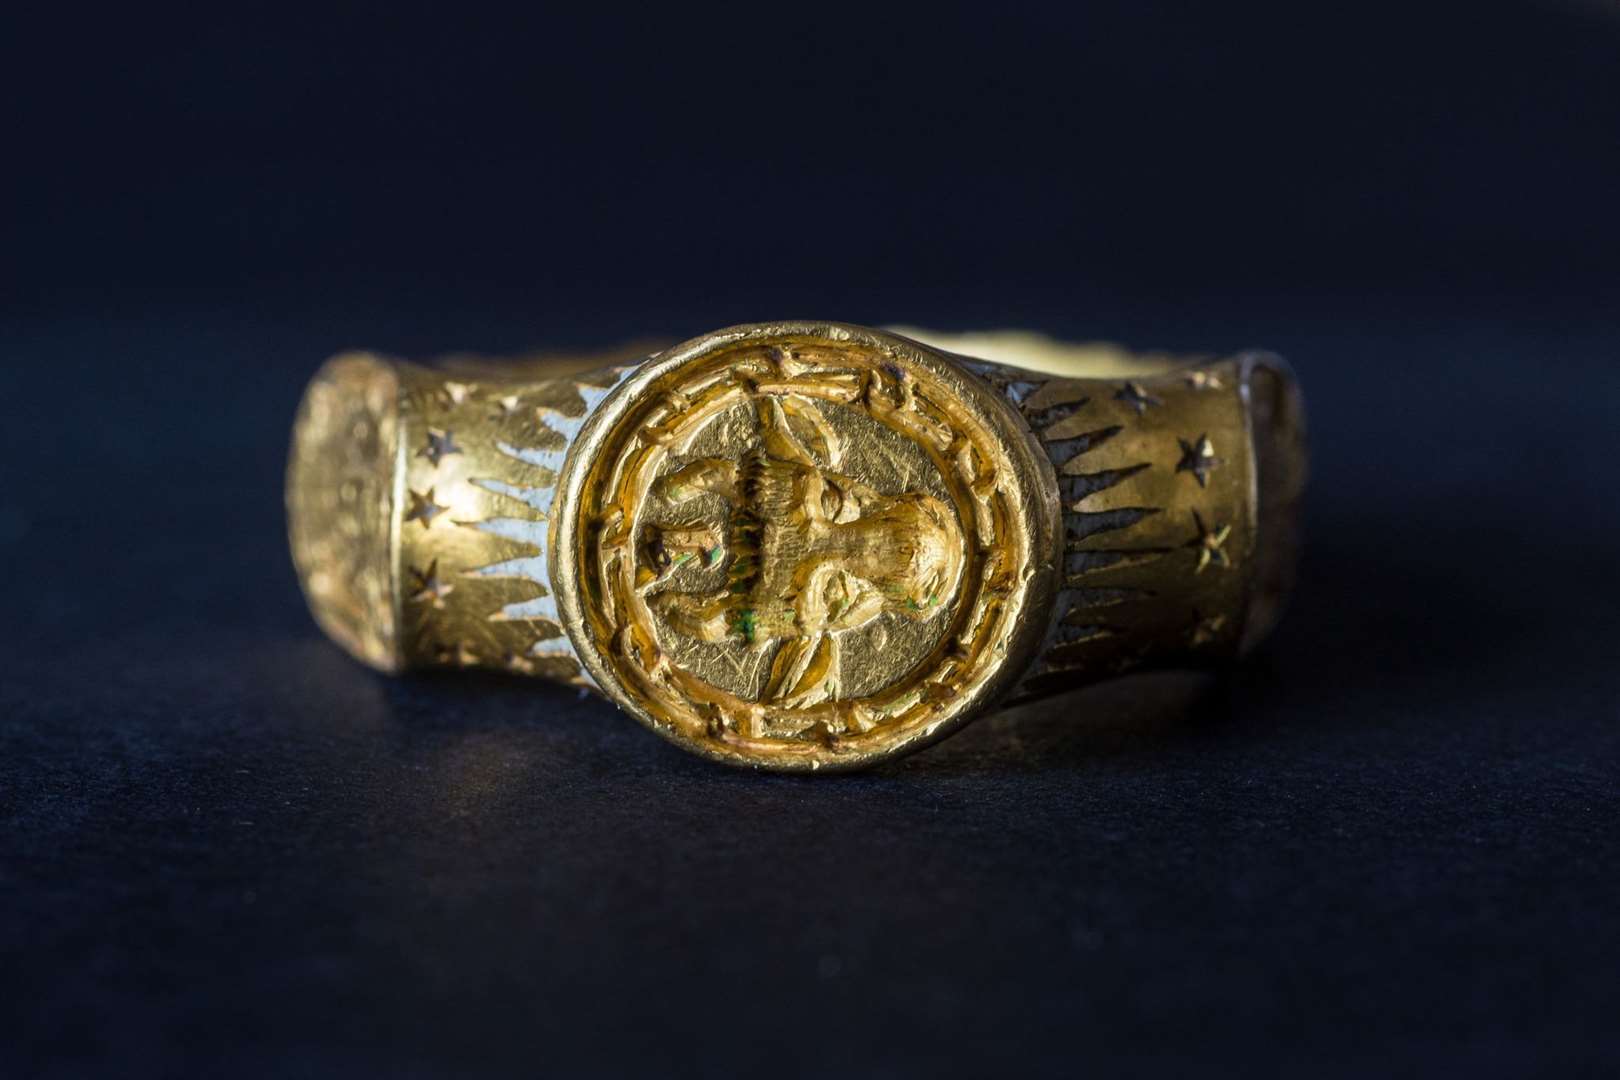 A rare Tudor gold signet ring believed to have belonged to a member of the Boleyn family. The ring is engraved with a bull’s head which also appears in the arms of the Boleyn family, including in a version on the seal of a document from Thomas Boleyn dating to that period. It went on display in the Great Hall at Hampton Court Palace from February 8, 2023. It was bought by Historic Royal Palaces with generous support from the Arts Council England/V&A Purchase Grant Fund, the Art Fund and the Meakins Family